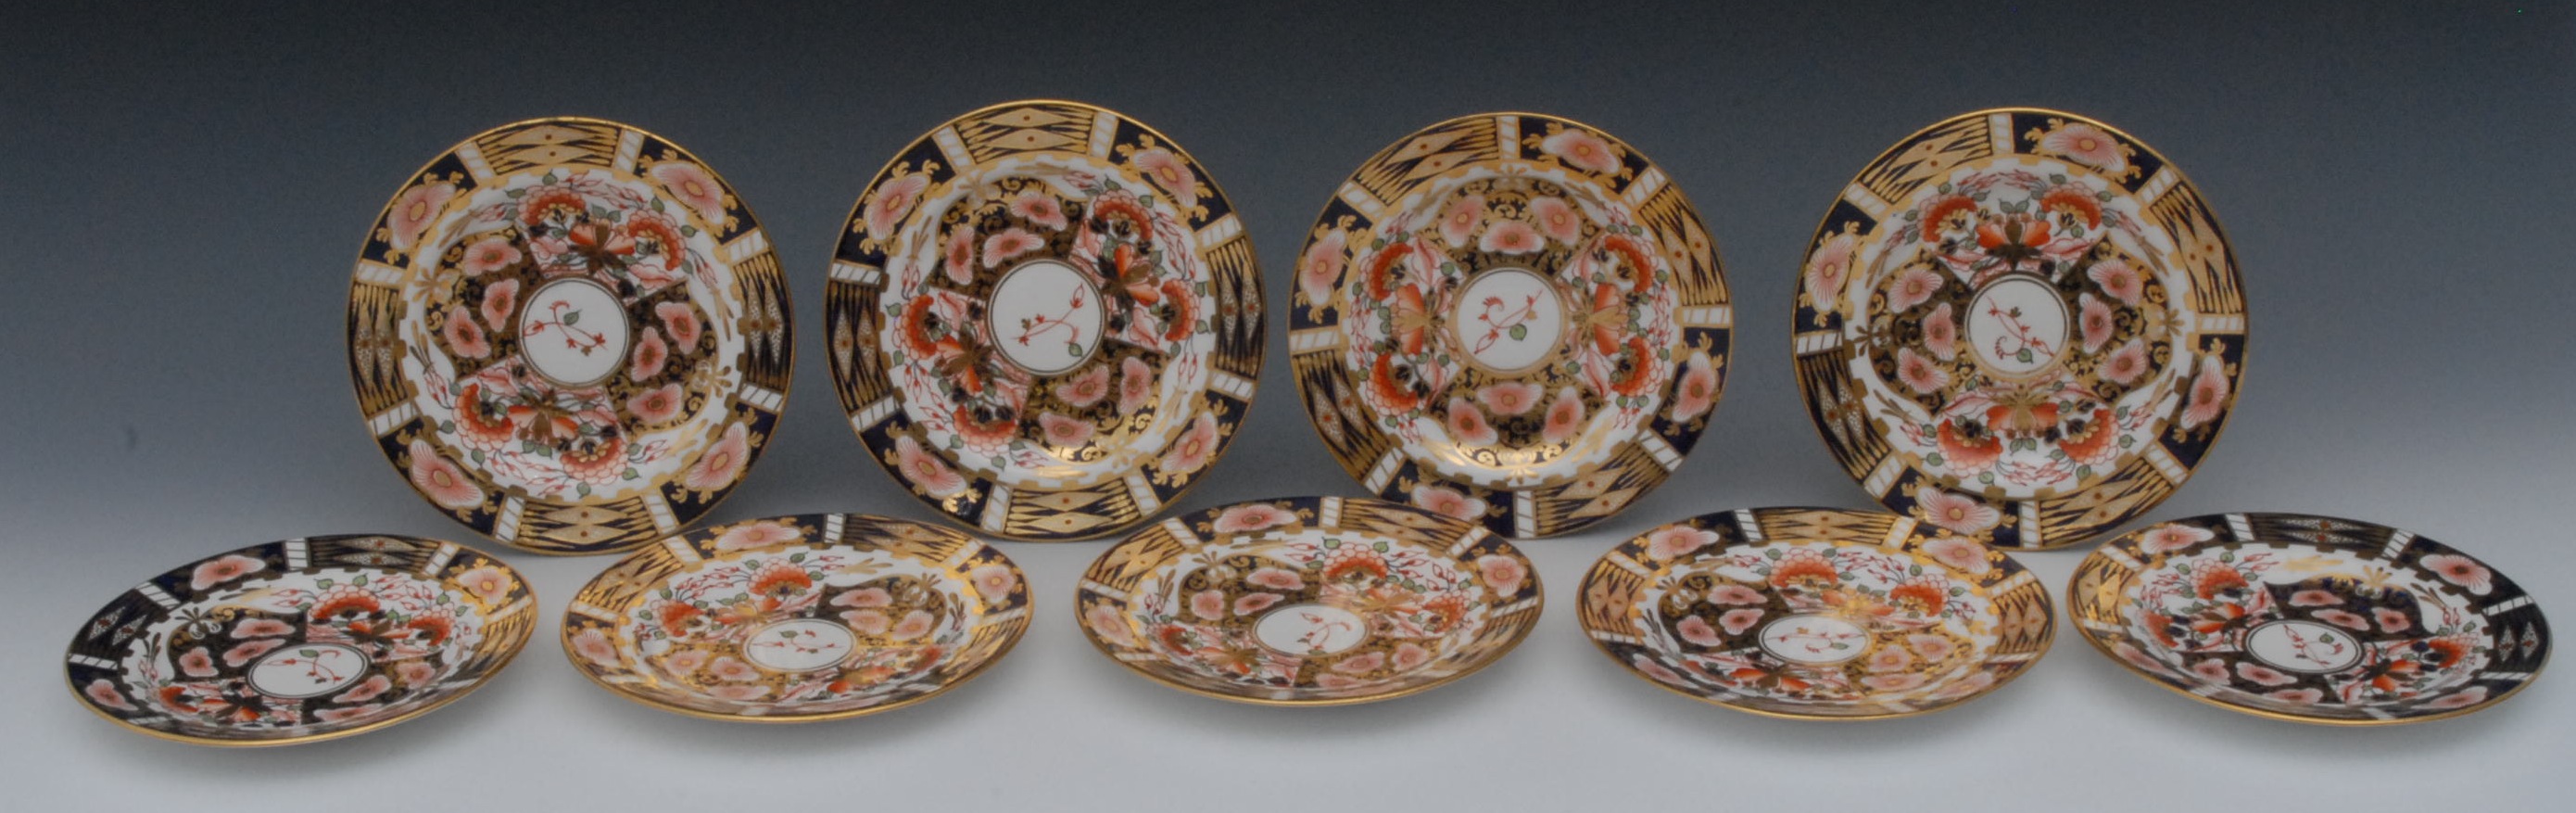 A set of nine Sampson Hancock Imari Old Witches pattern side plates, 15cm diam, S, H, crown, crossed